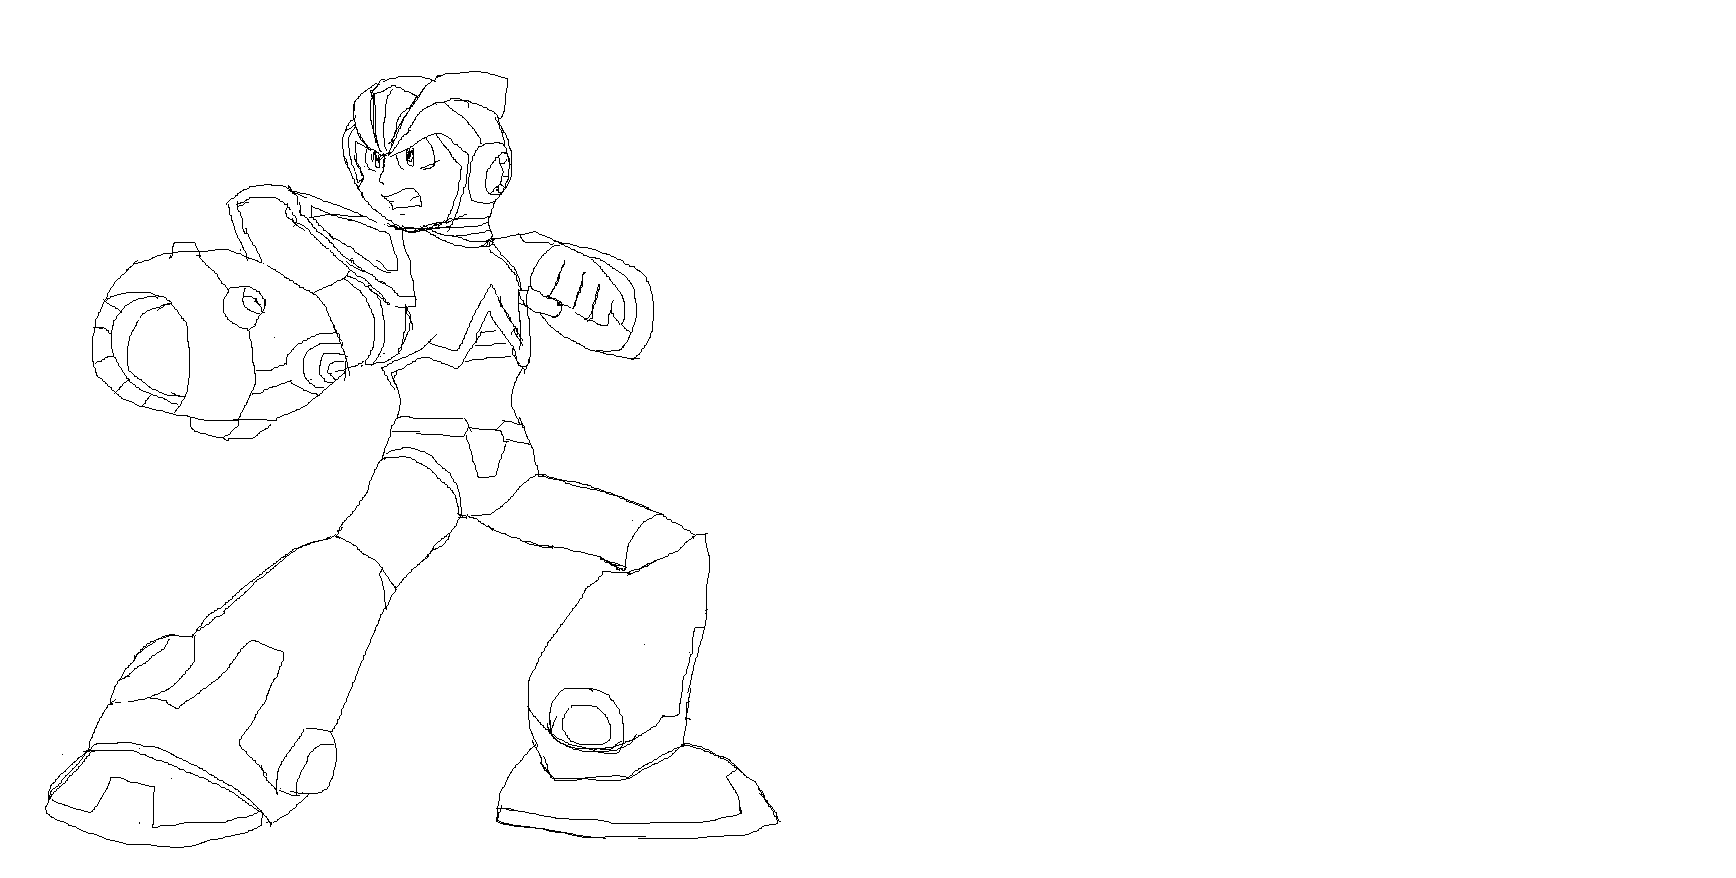 I worked on a drawing of Mega Man X-mega-man-armored-x-png